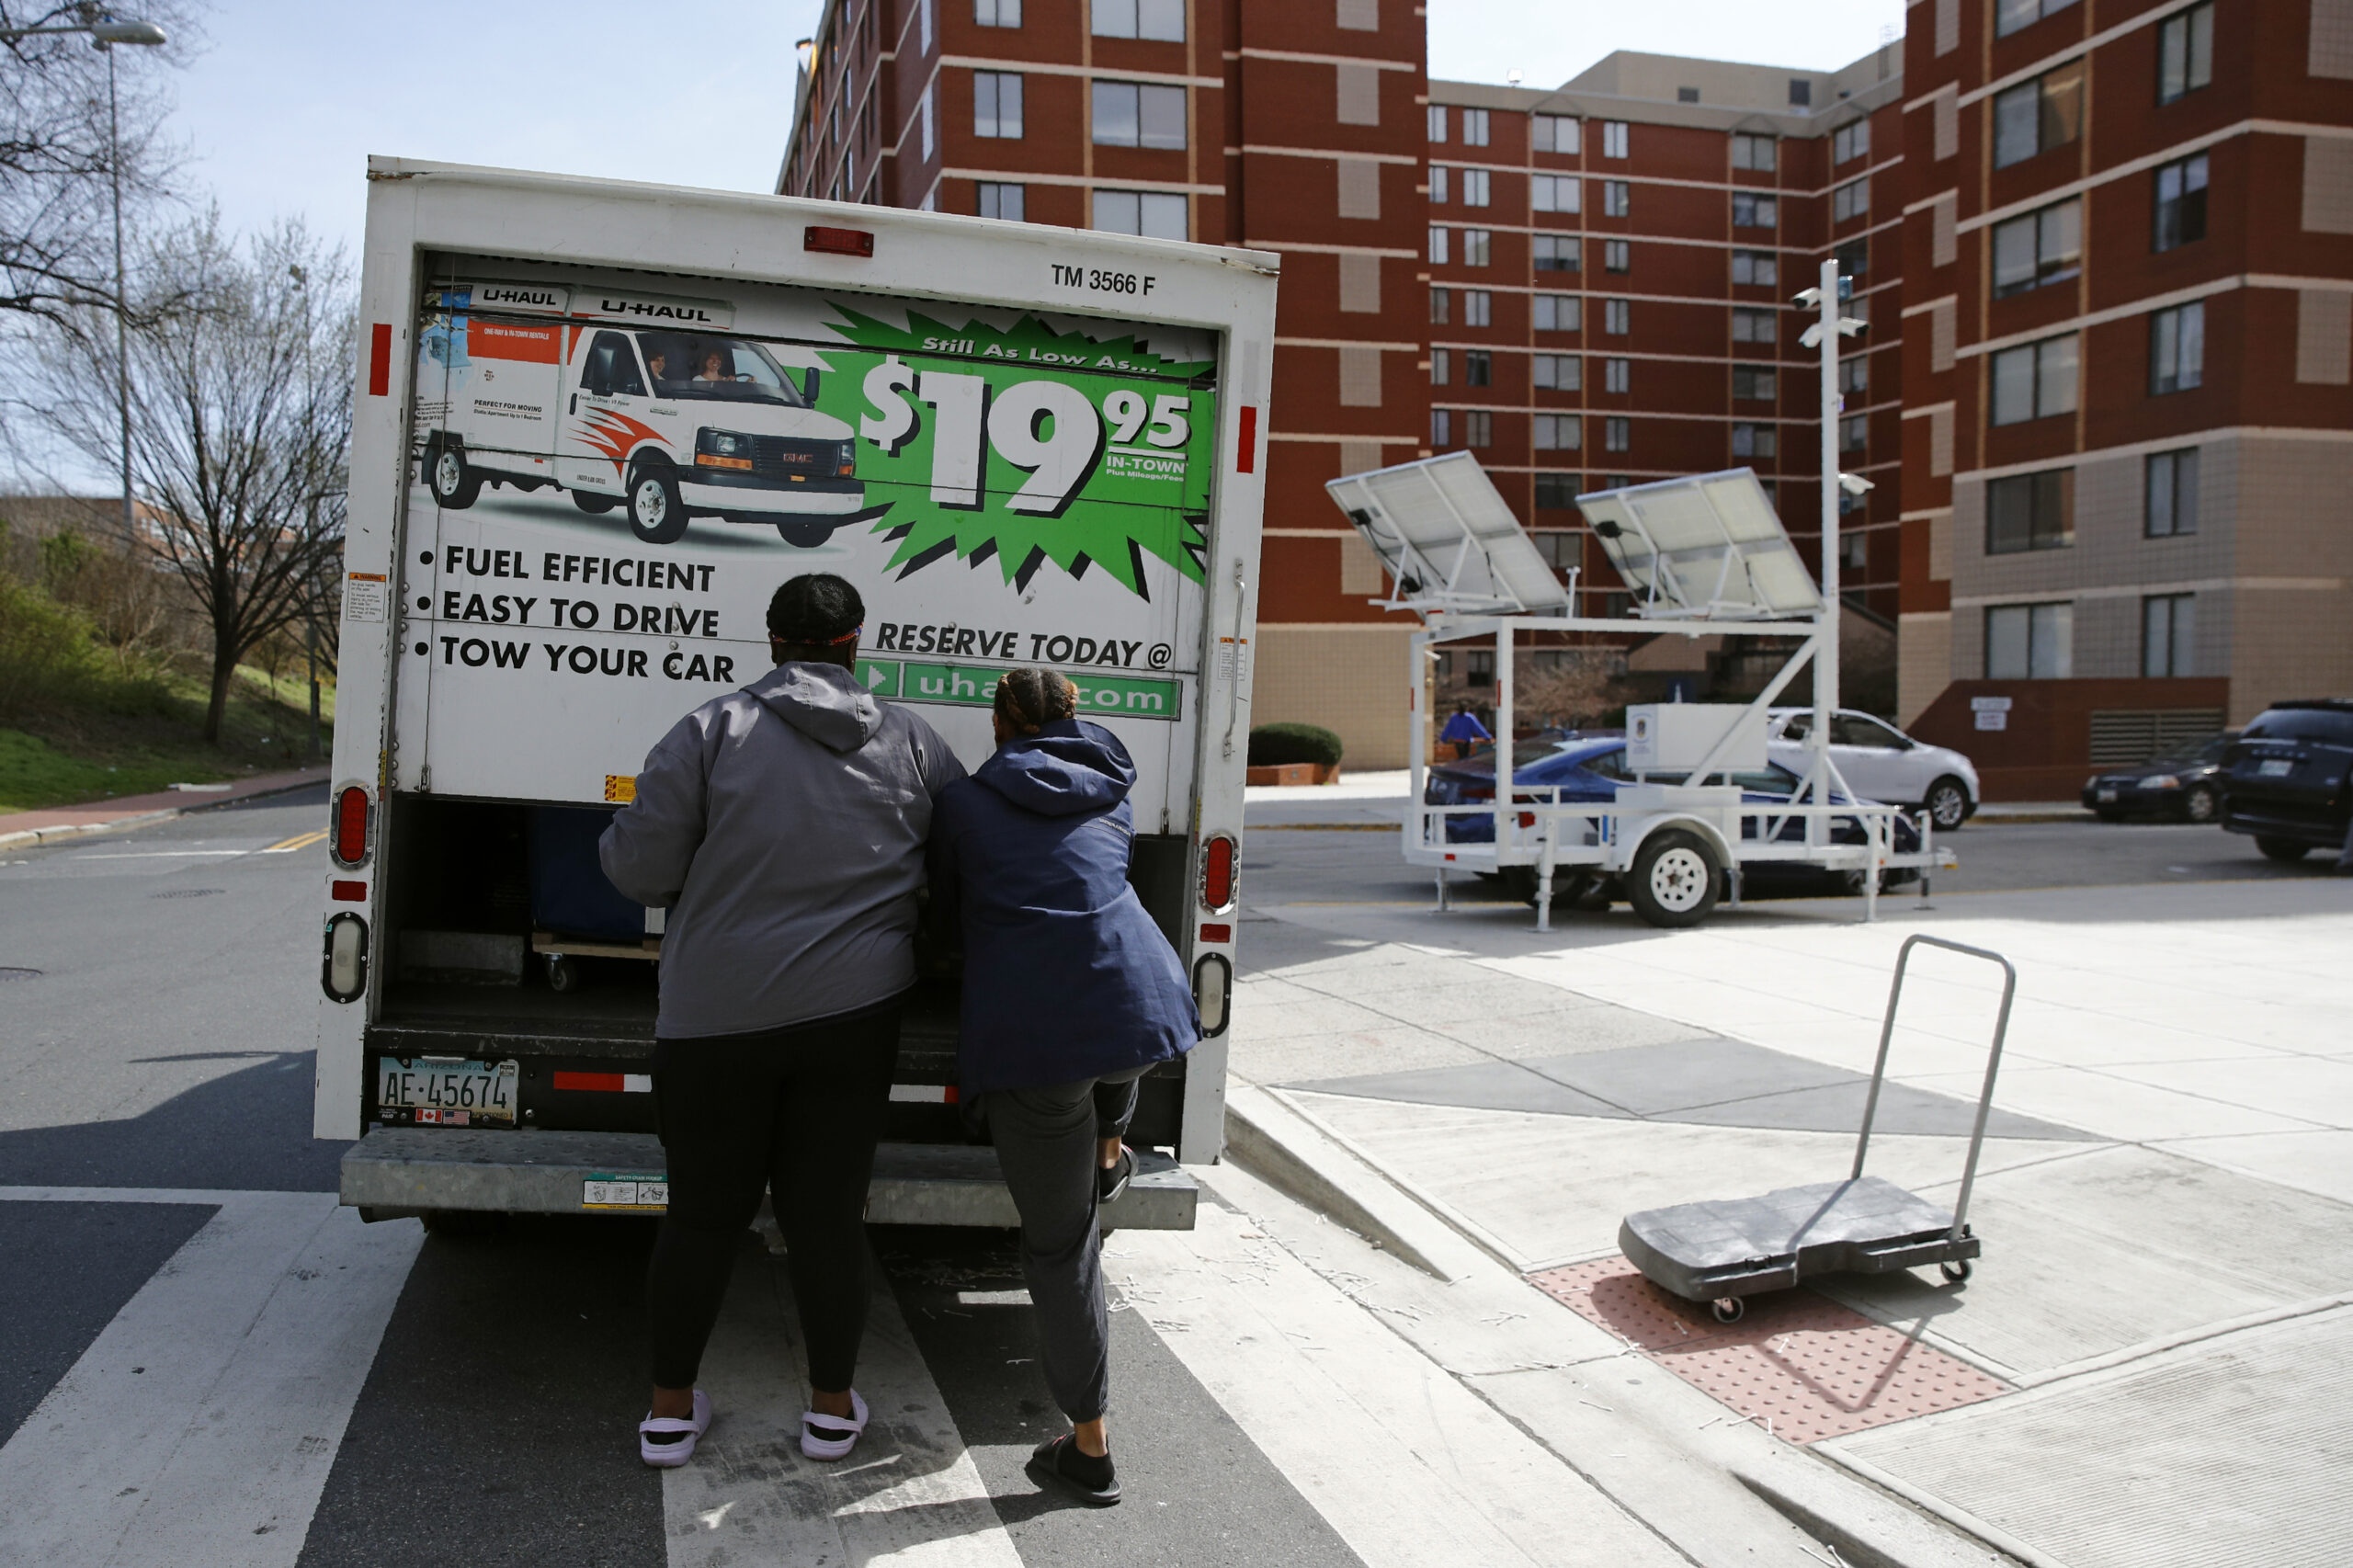 FILE - Students finish loading belongings into a U-Haul truck as they move out of their dorm in Washington on March 18, 2020. The proportion of people who moved over the past year fell to its lowest rate in the 73 years that it has been tracked, in a refutation of popular anecdotes that there was a great migration in the U.S. during the pandemic, according to figures released Wednesday, Nov. 17, 2021 by the U.S. Census Bureau. (AP Photo/Patrick Semansky, File)